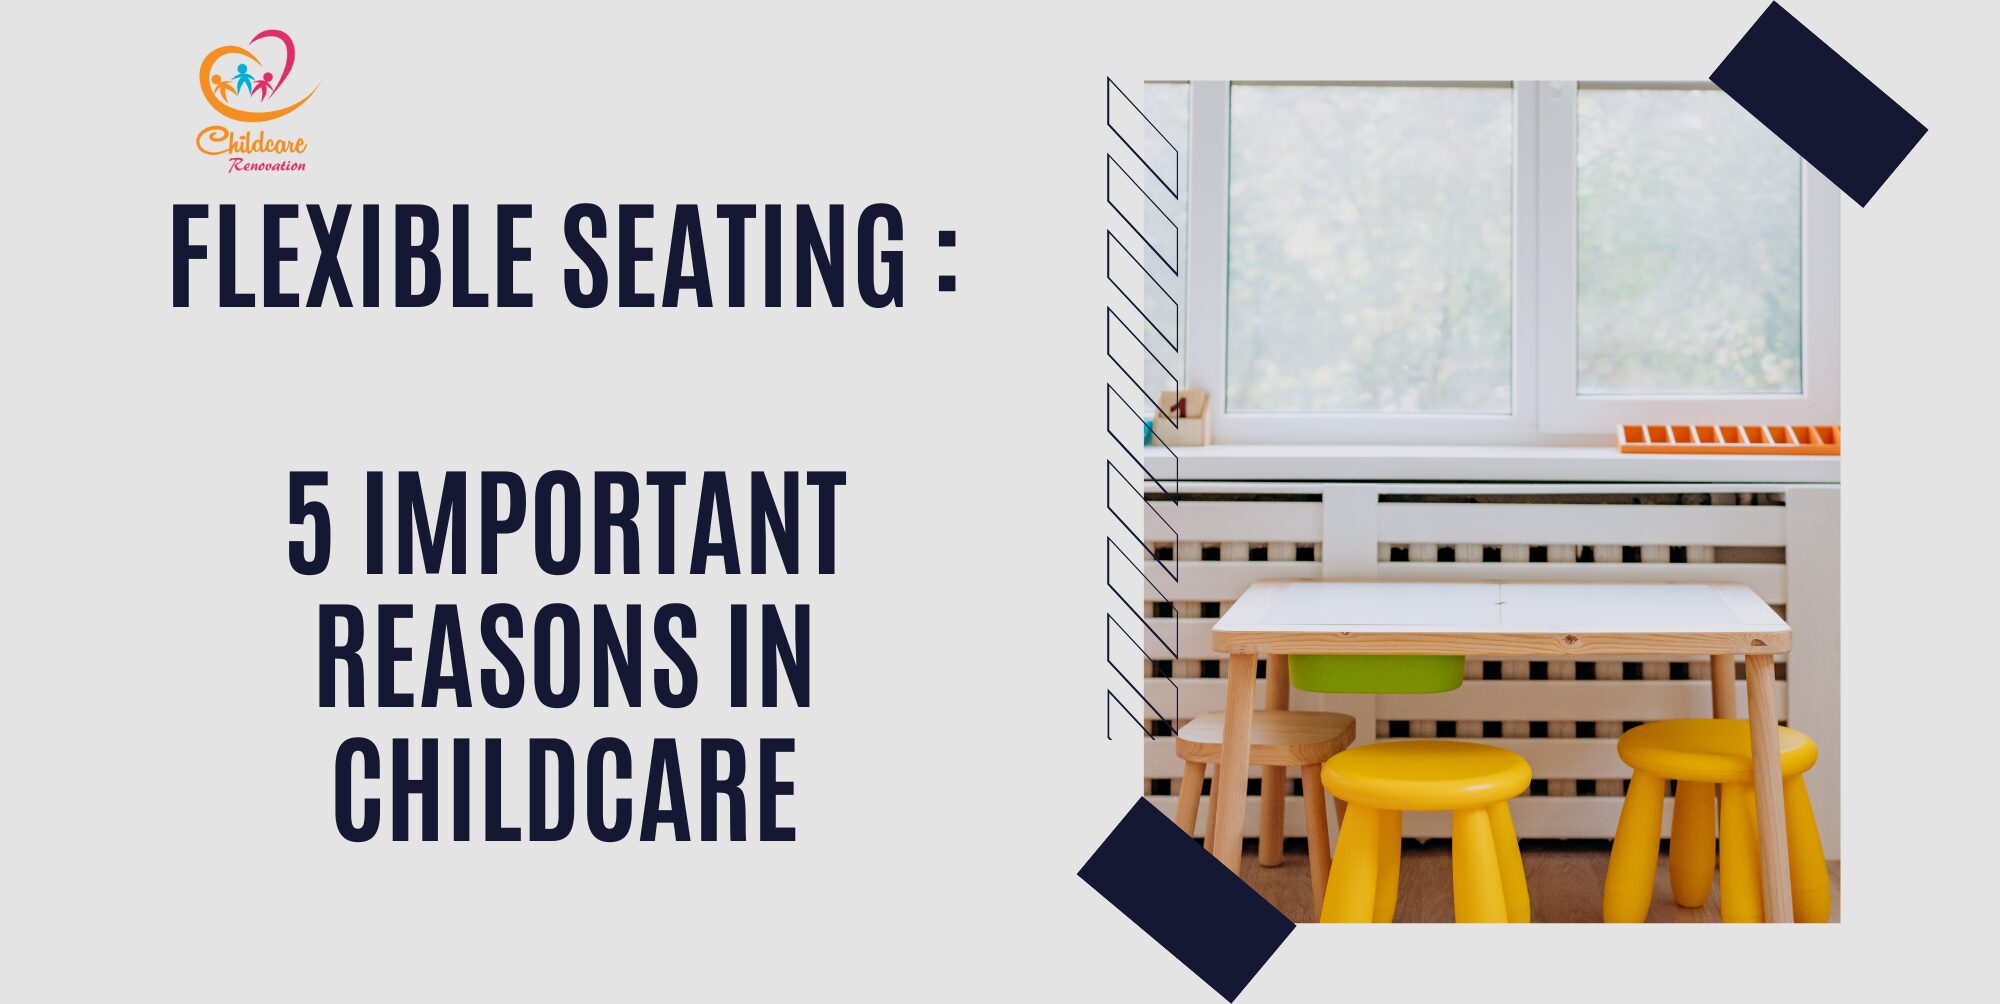 Flexible Seating : 5 Important Reasons in Childcare